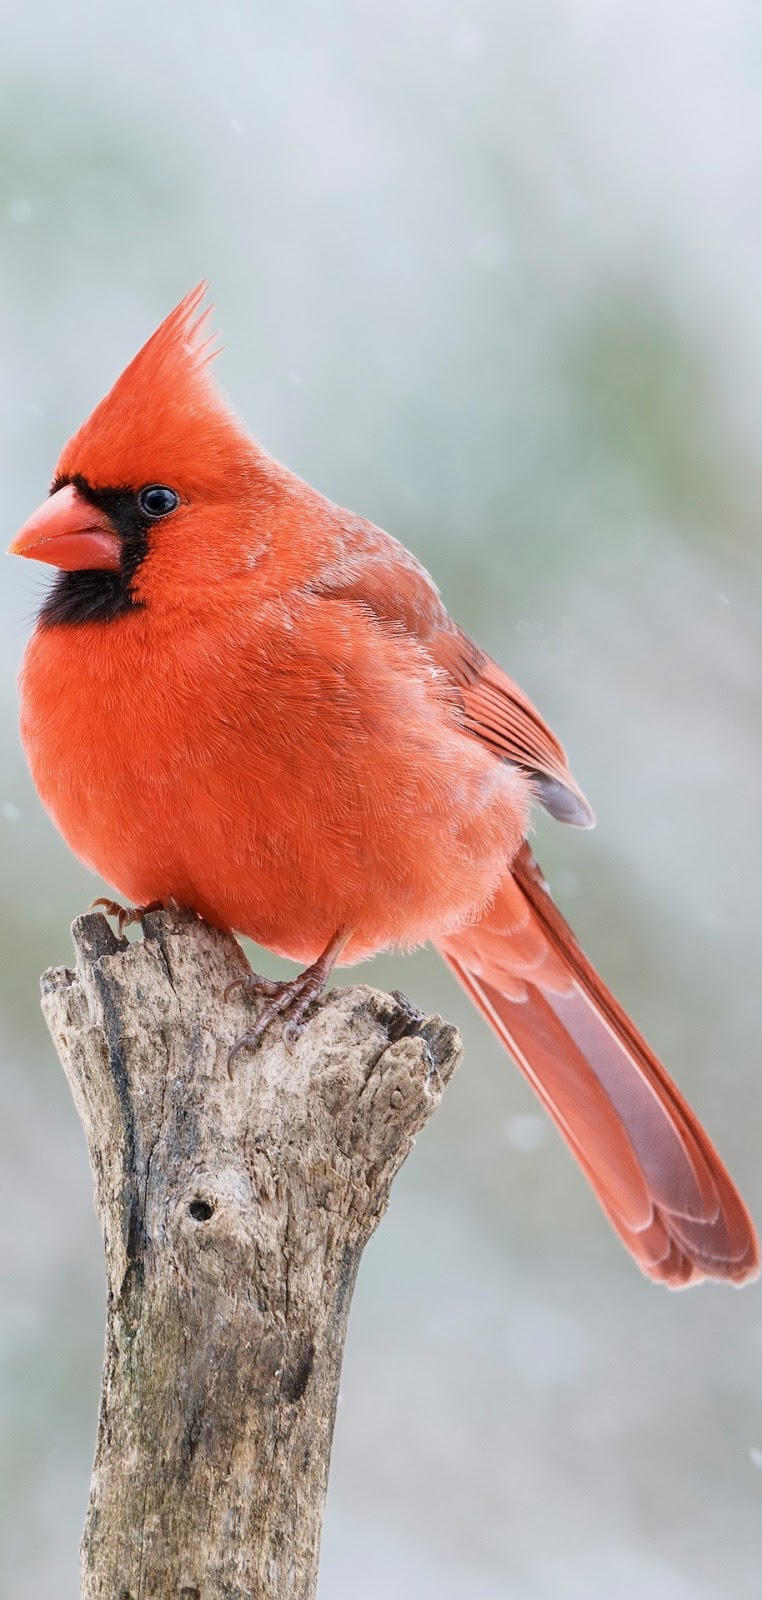 A male red cardinal.